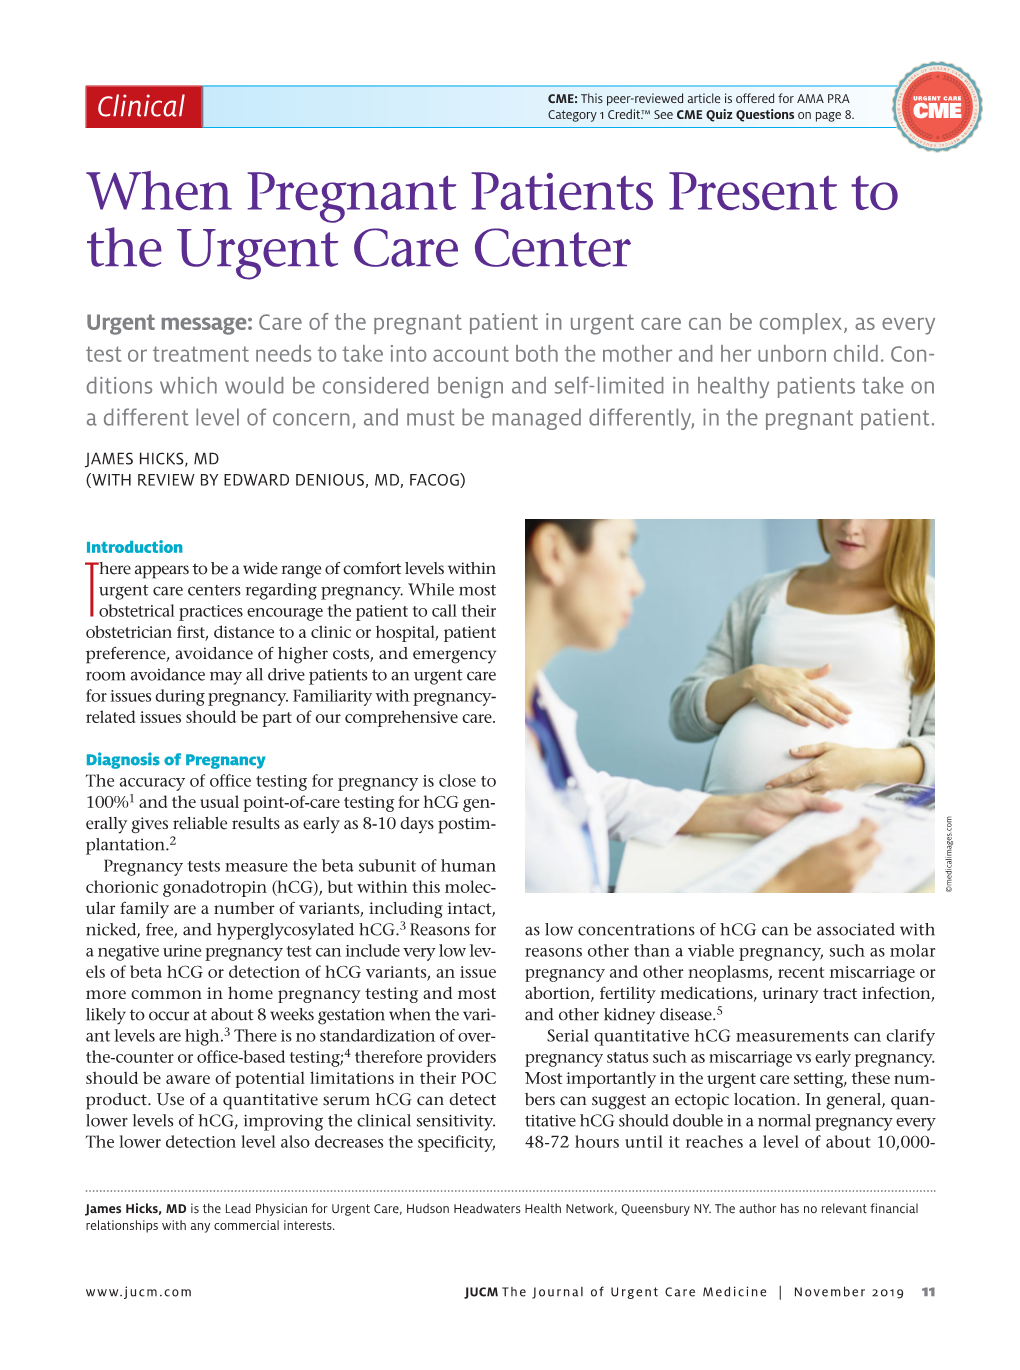 When Pregnant Patients Present to the Urgent Care Center